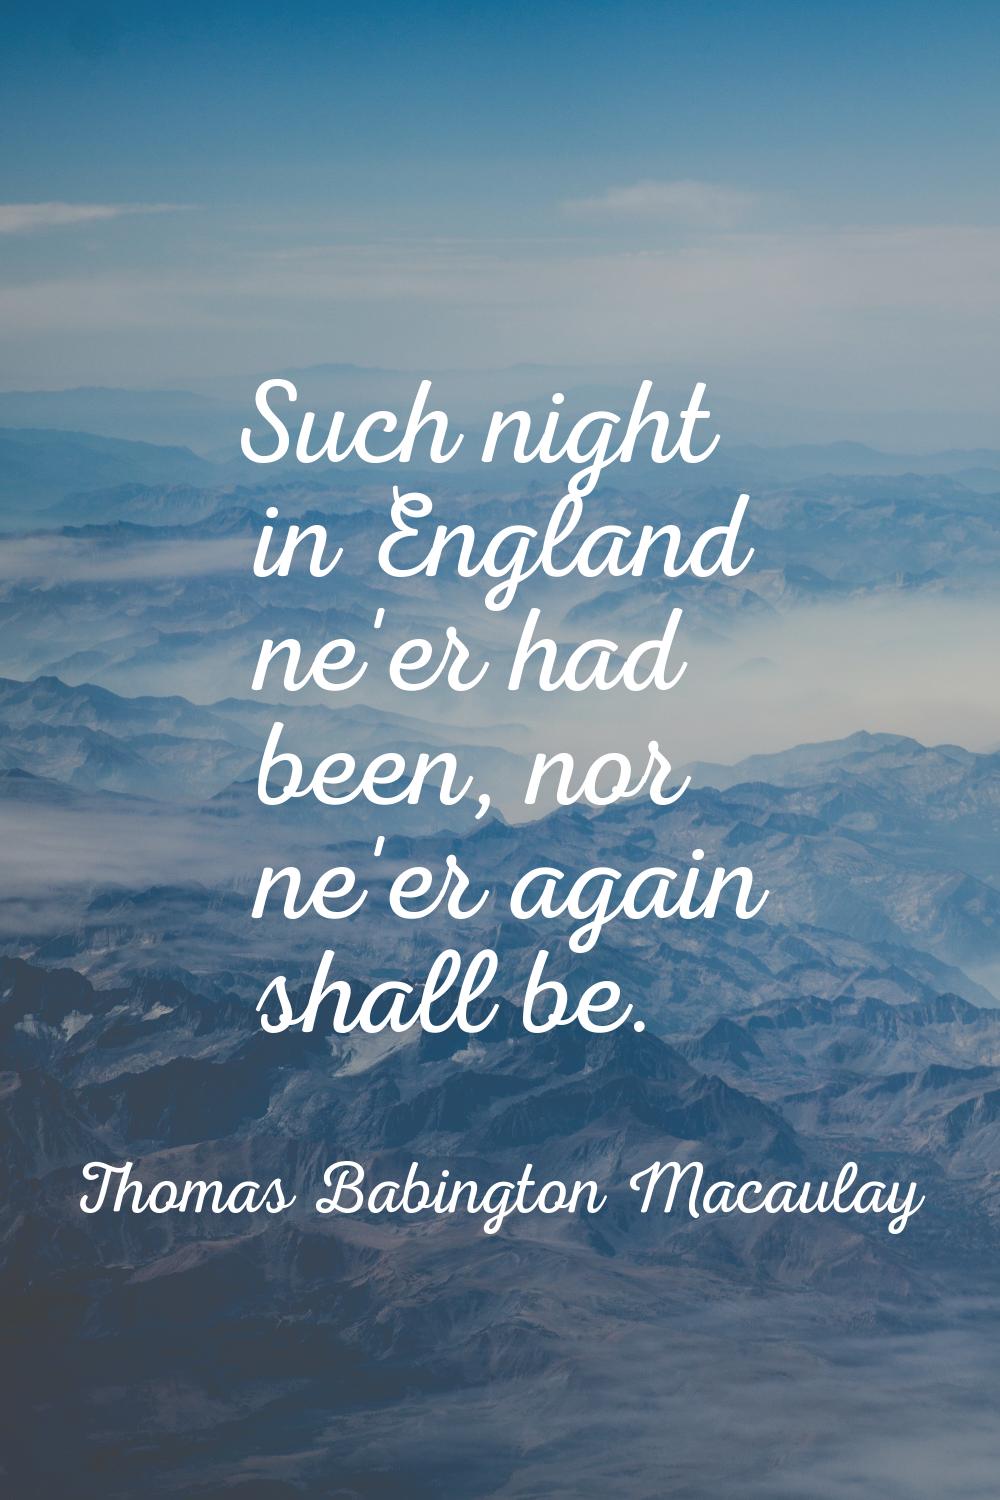 Such night in England ne'er had been, nor ne'er again shall be.